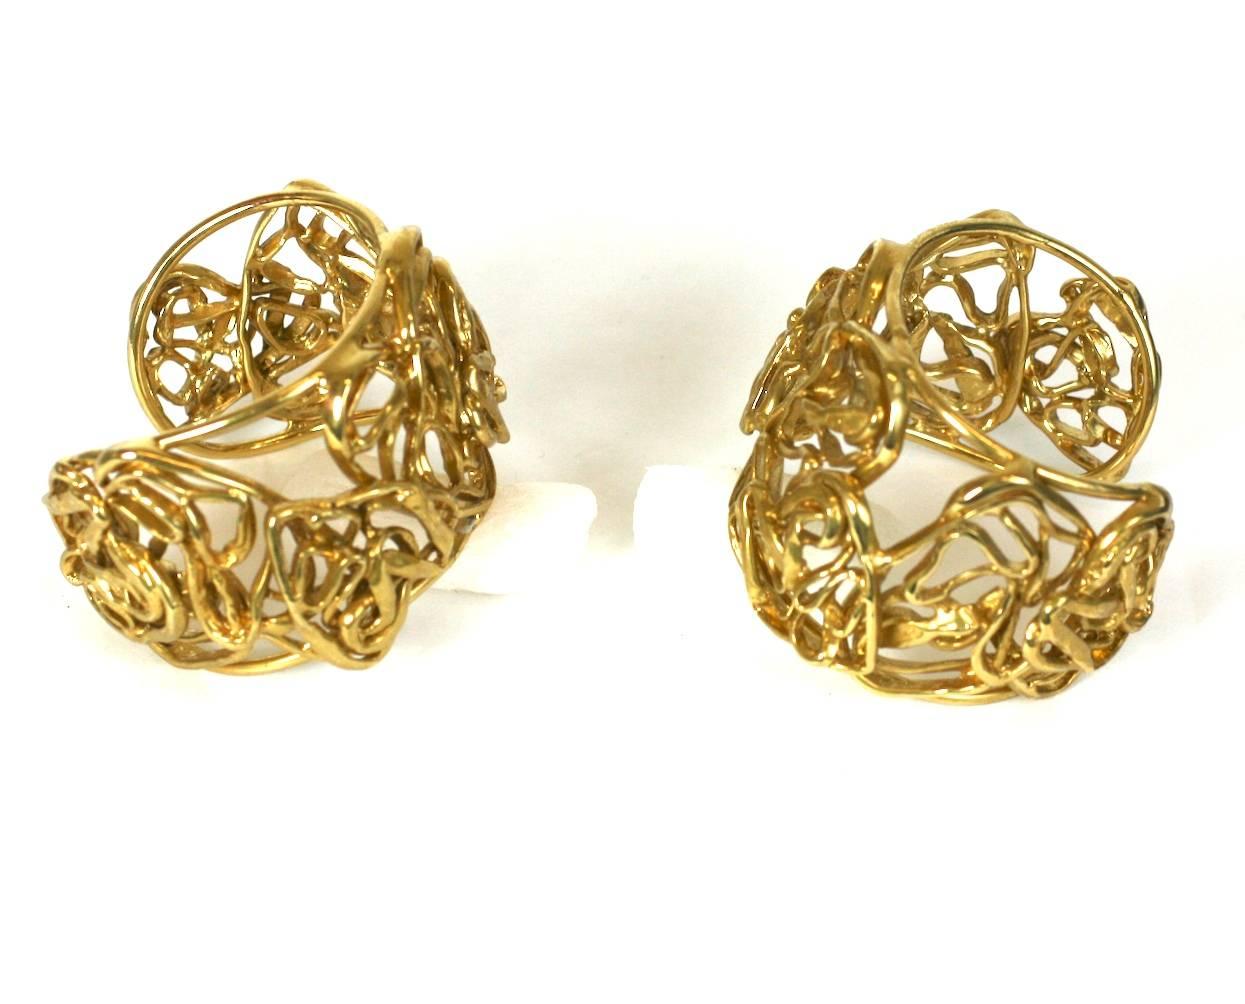 Amazing Yves Saint Laurent sculptural gilt hand made cuffs by Maison Goosens. Artisanally crafted of gilded hammered wire coiled into layers of abstract hearts, which was one of YSL signature motifs. Signed YSL, Made in France. Excellent Condition.